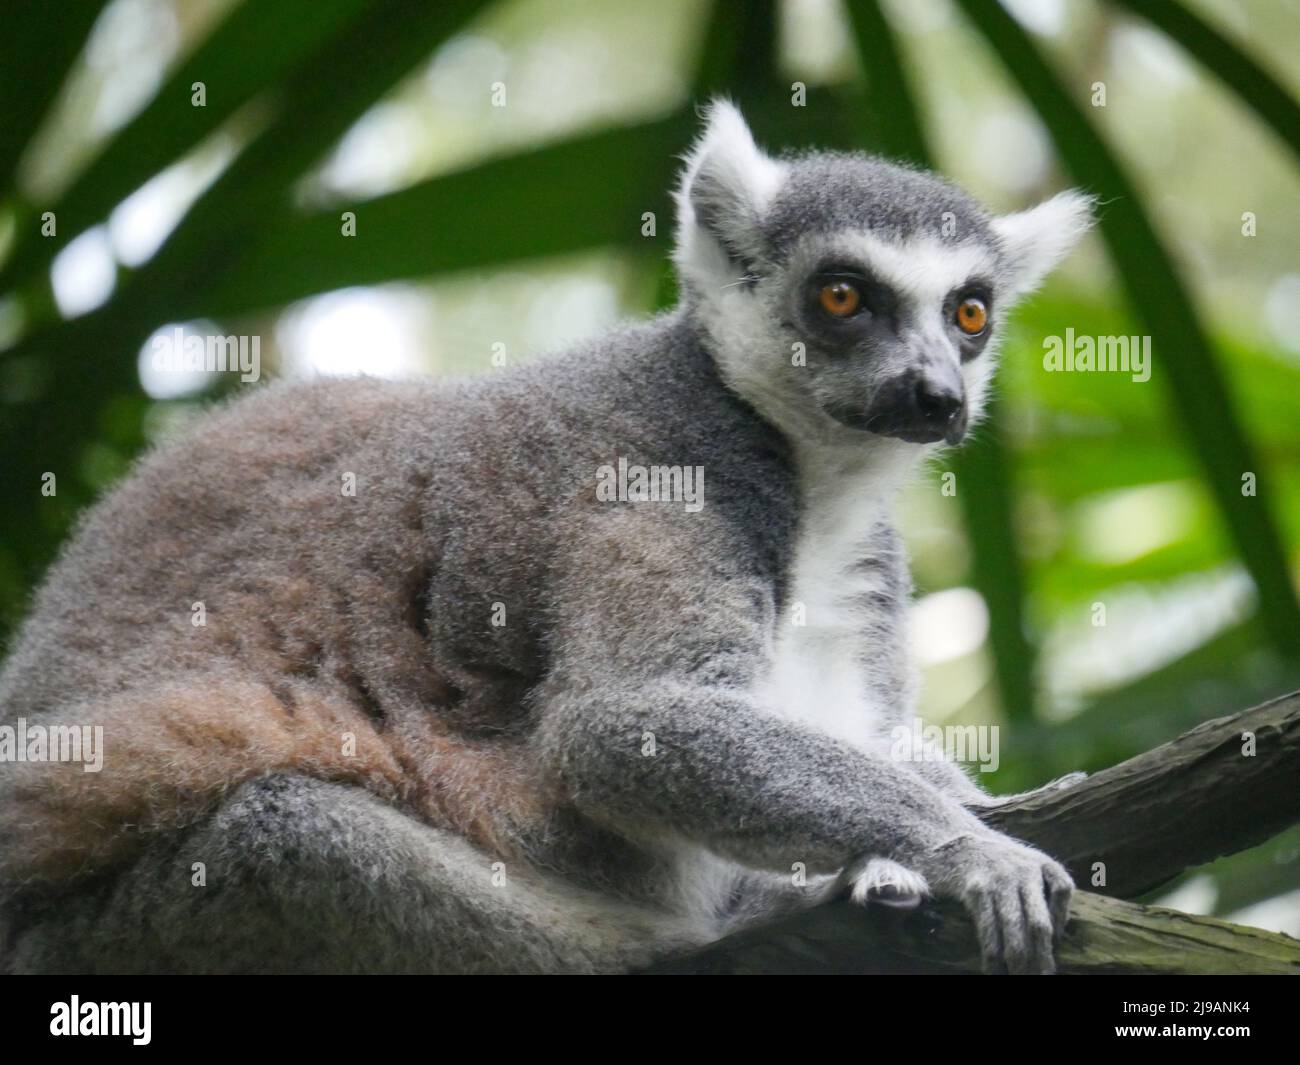 Ring-tailed lemur : The ring tailed lemur (Lemur catta) is a large strepsirrhine primate and the most recognized lemur due to its long, black and whit Stock Photo